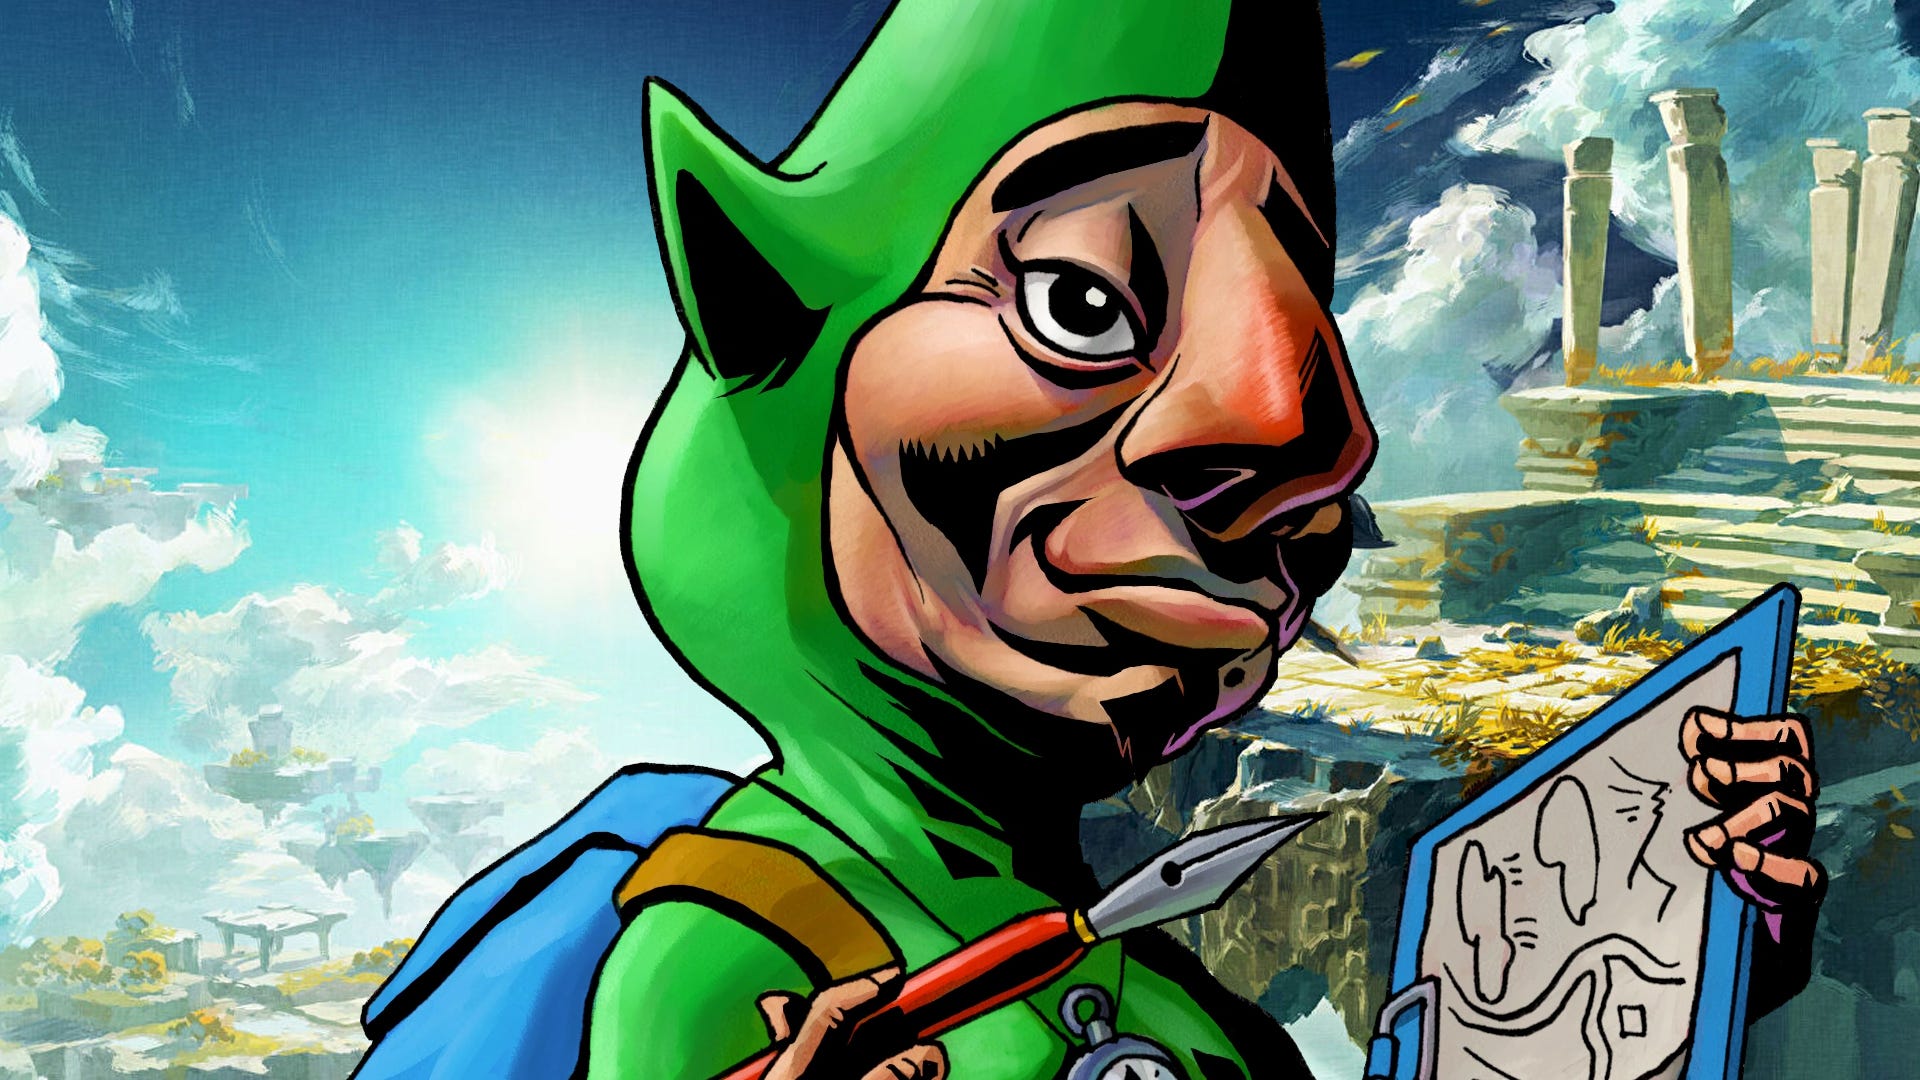 The Legend of Zelda film director wants it to be “grounded” so don’t expect a motion captured Tingle